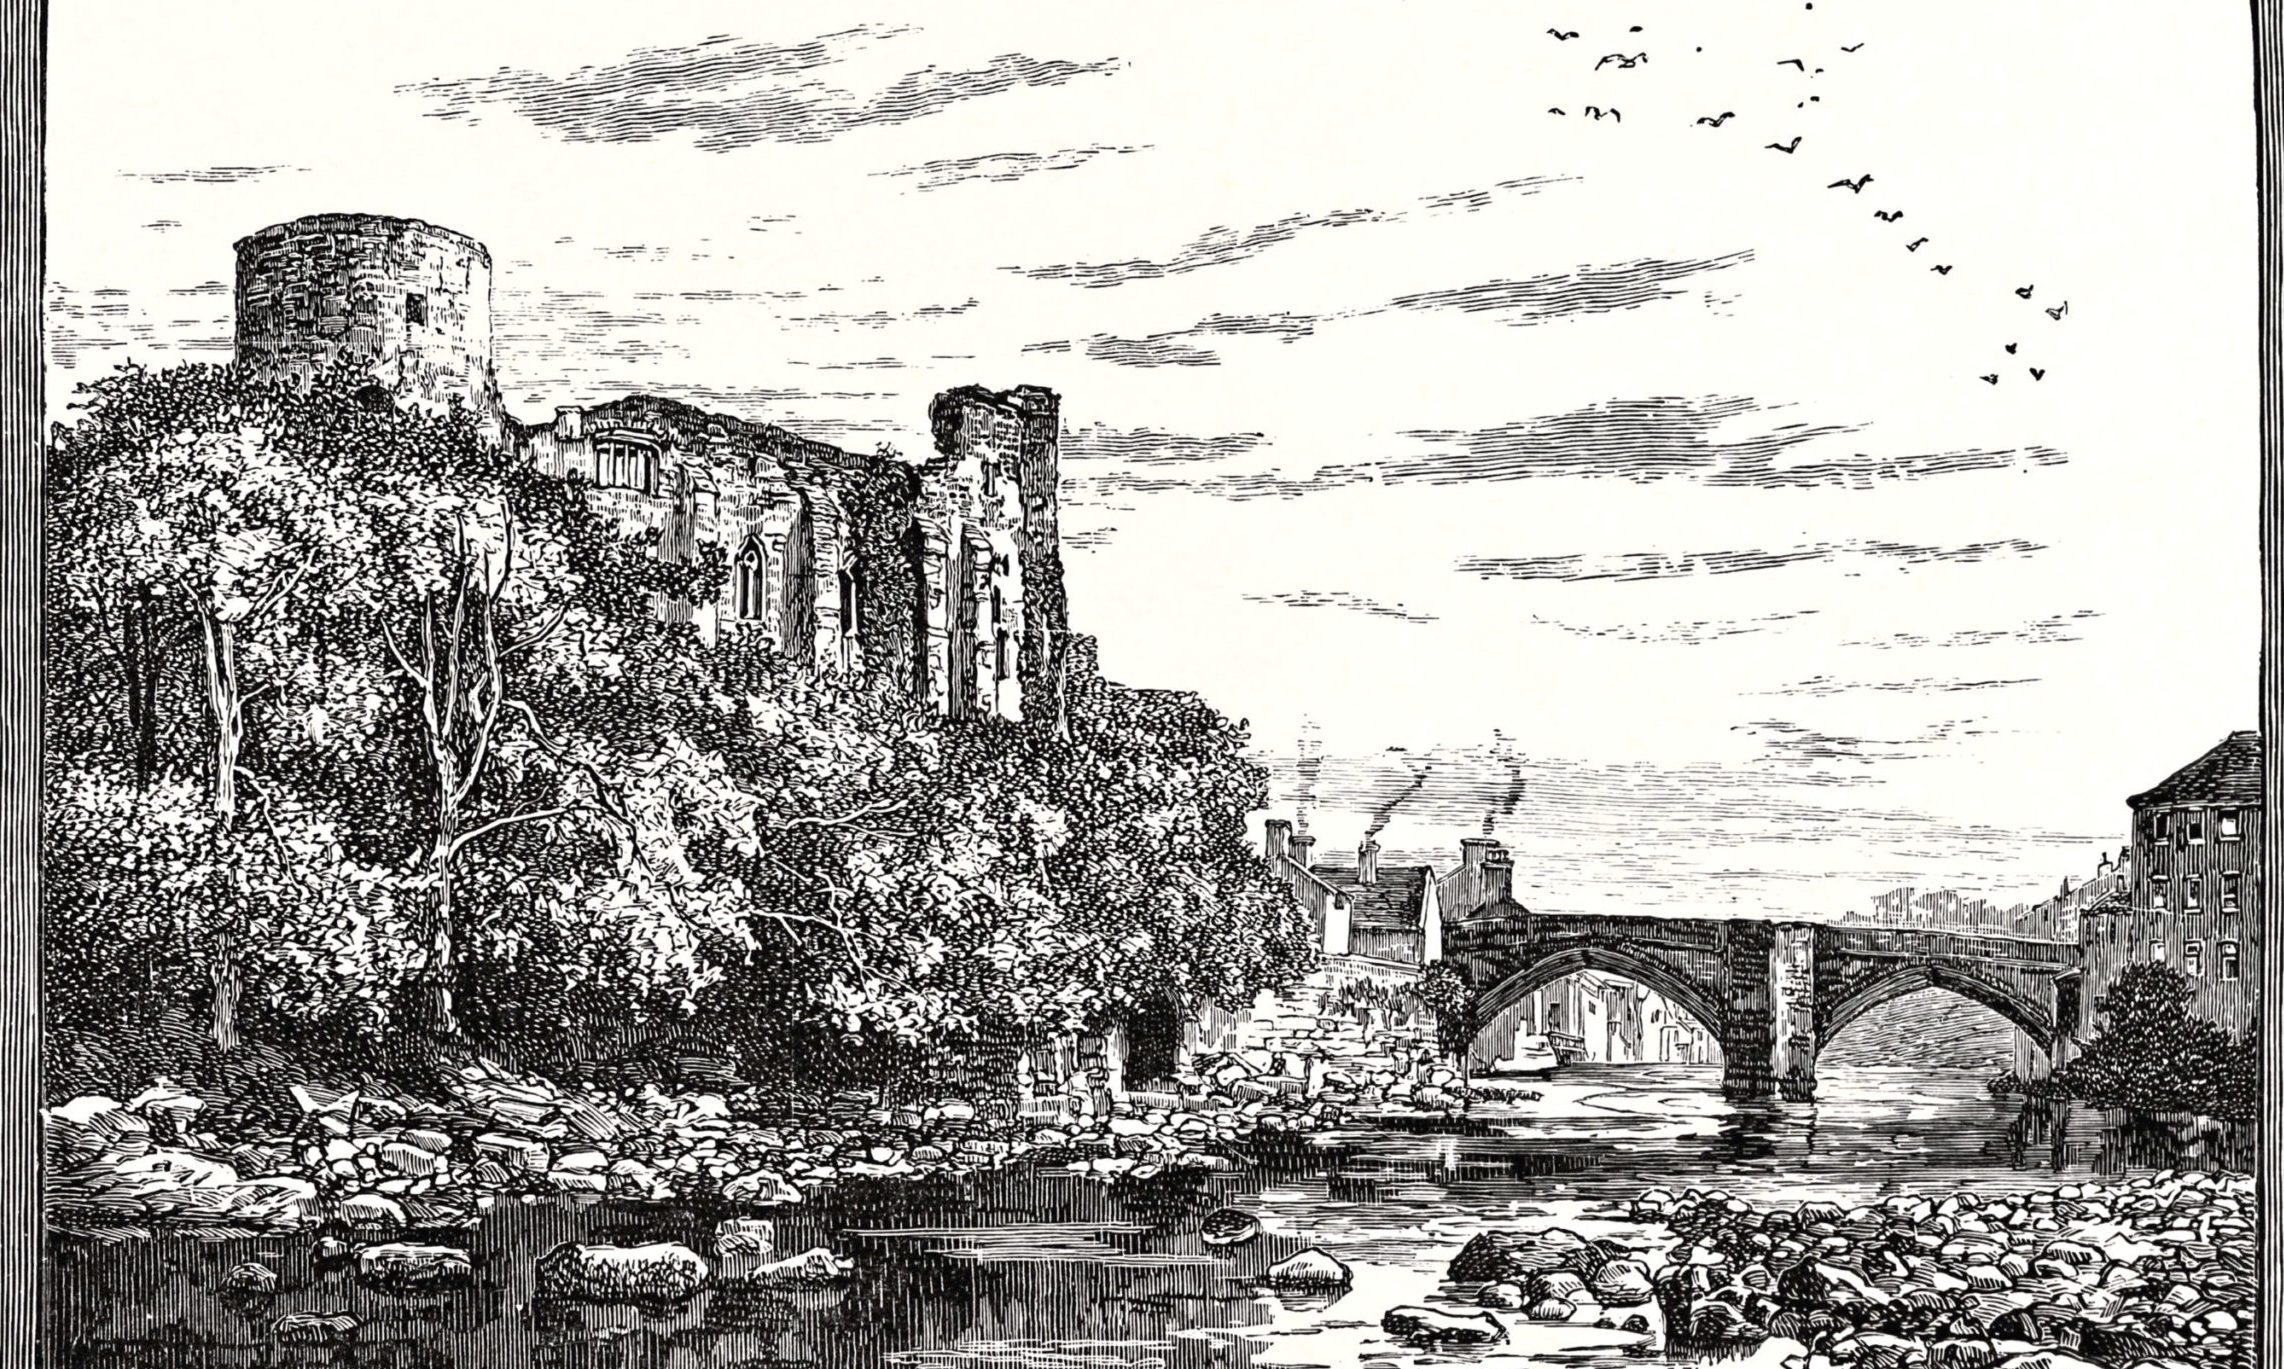 Barnard Castle (Barney), the market town in Teesdale, Country Durham, has a colourful past.